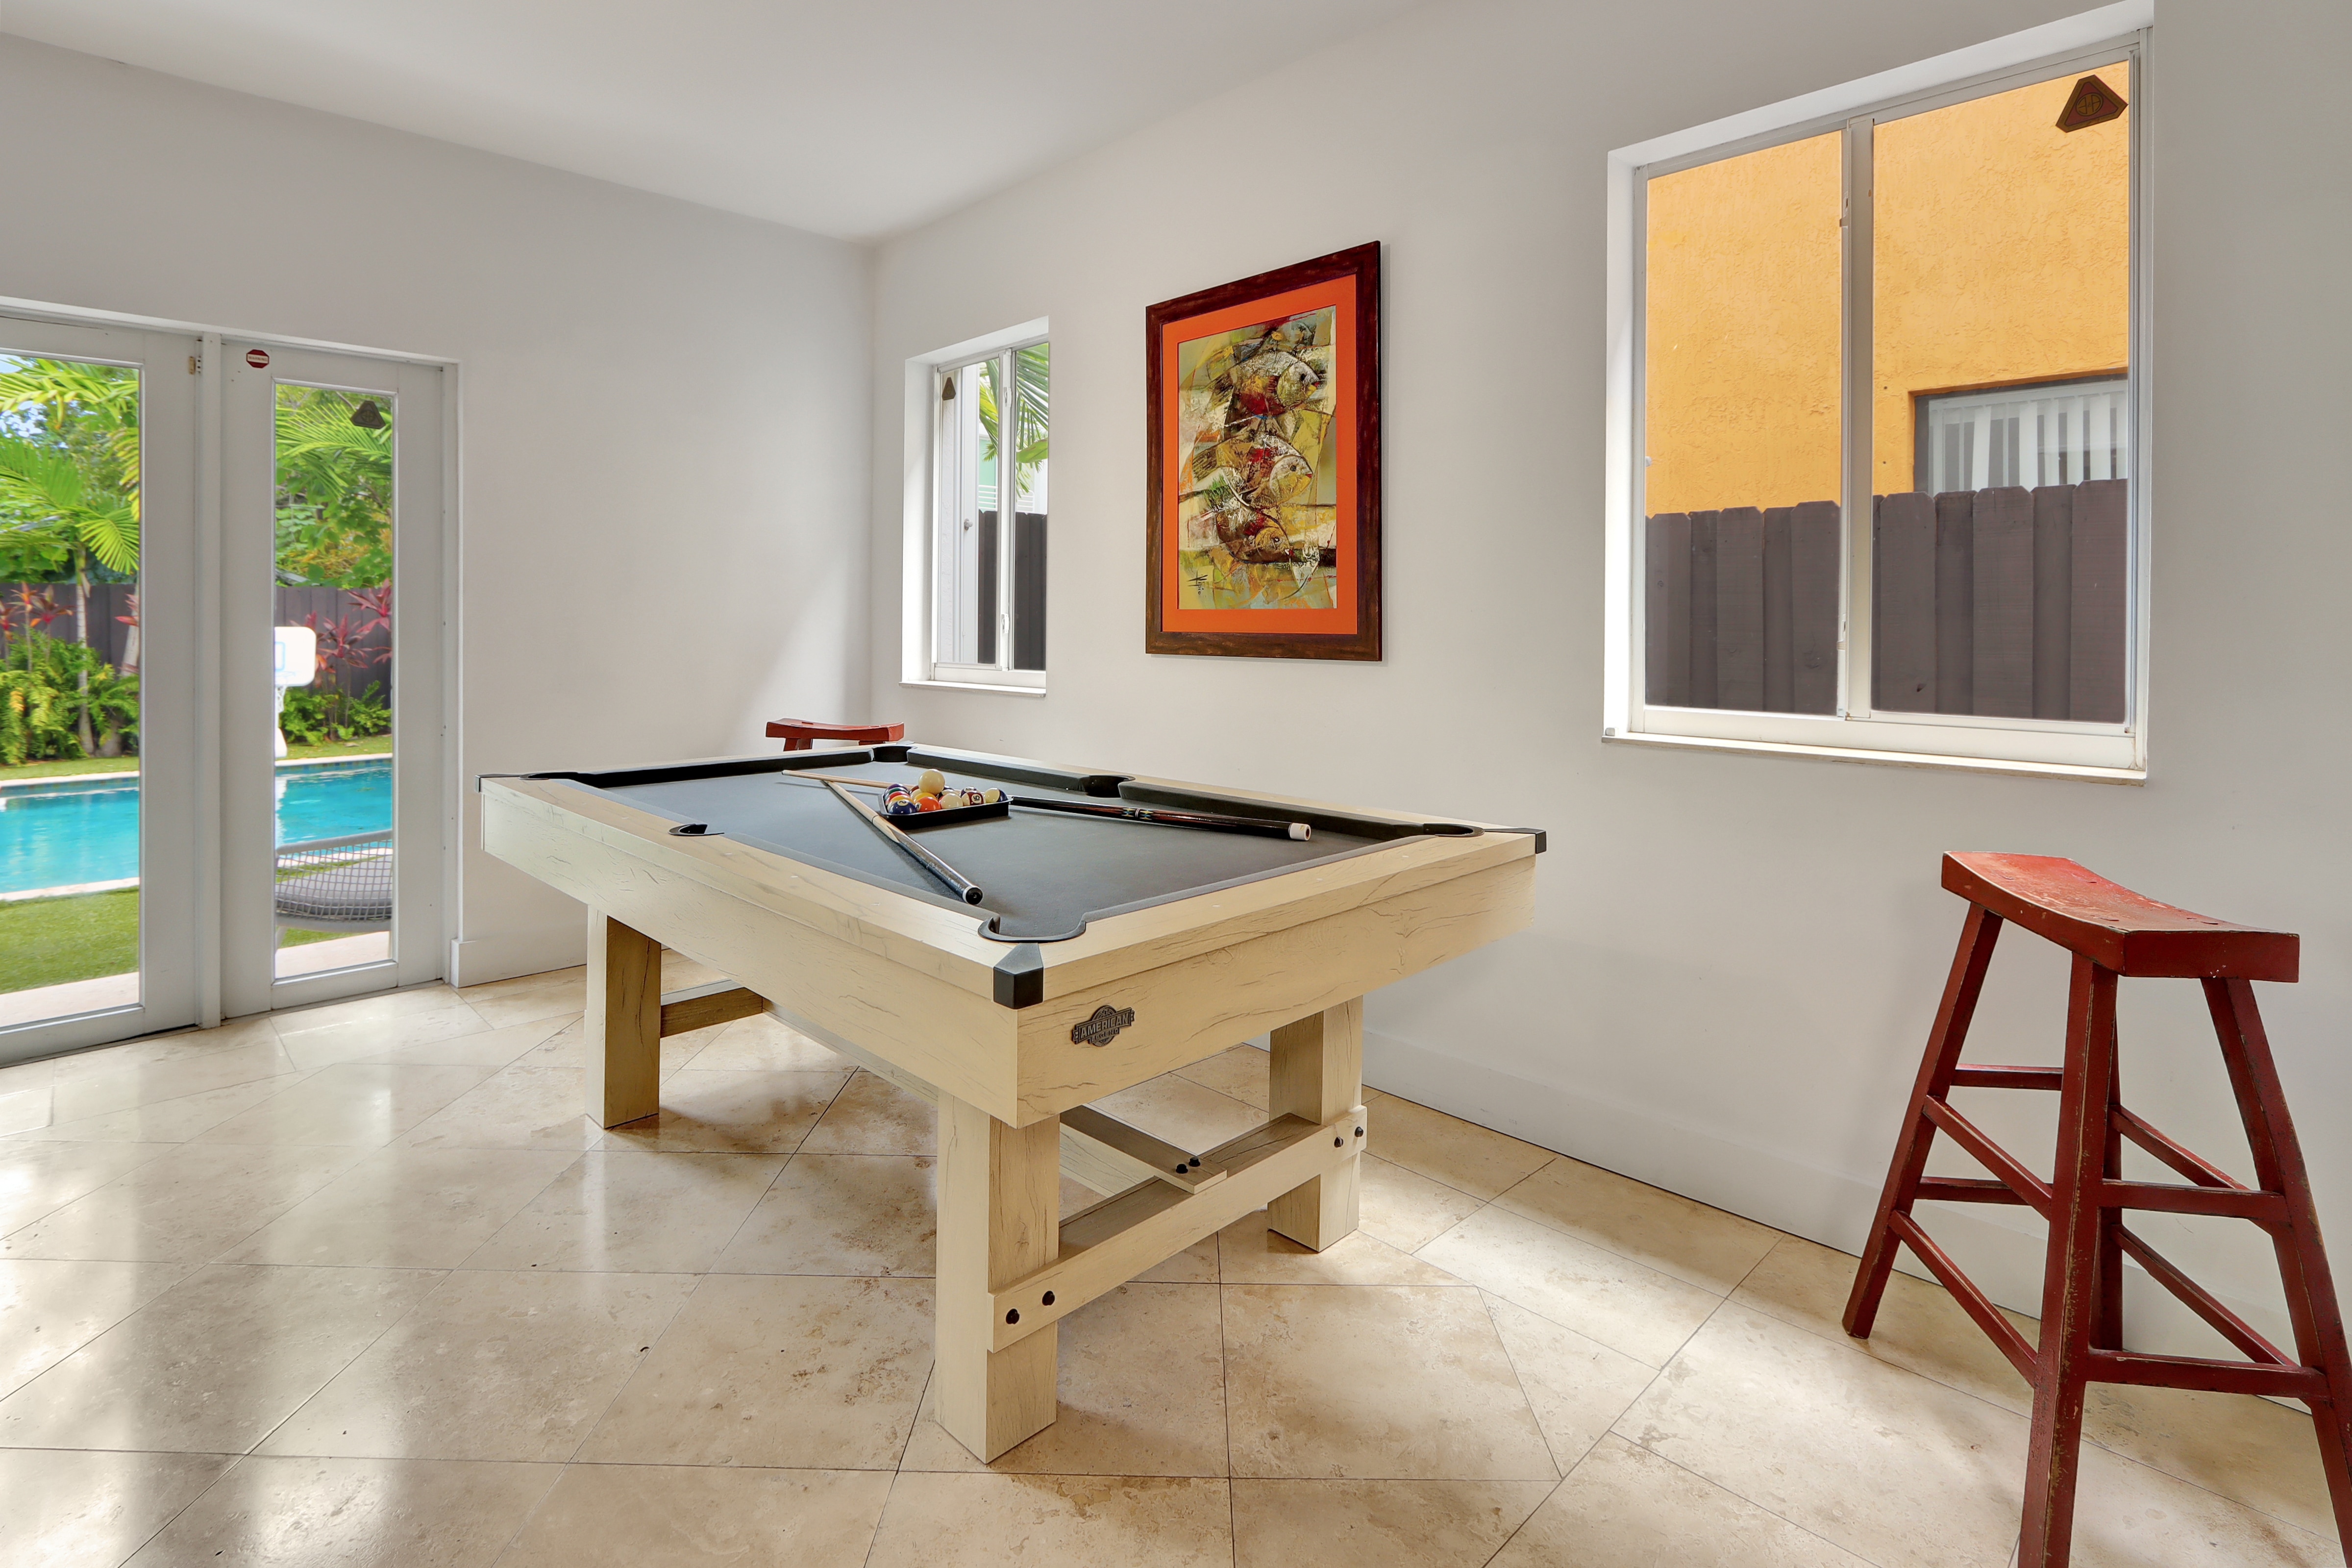 Property Image 2 - The Grove: Private Pool, Pool Table, Near Beach, by NewmanHospitality